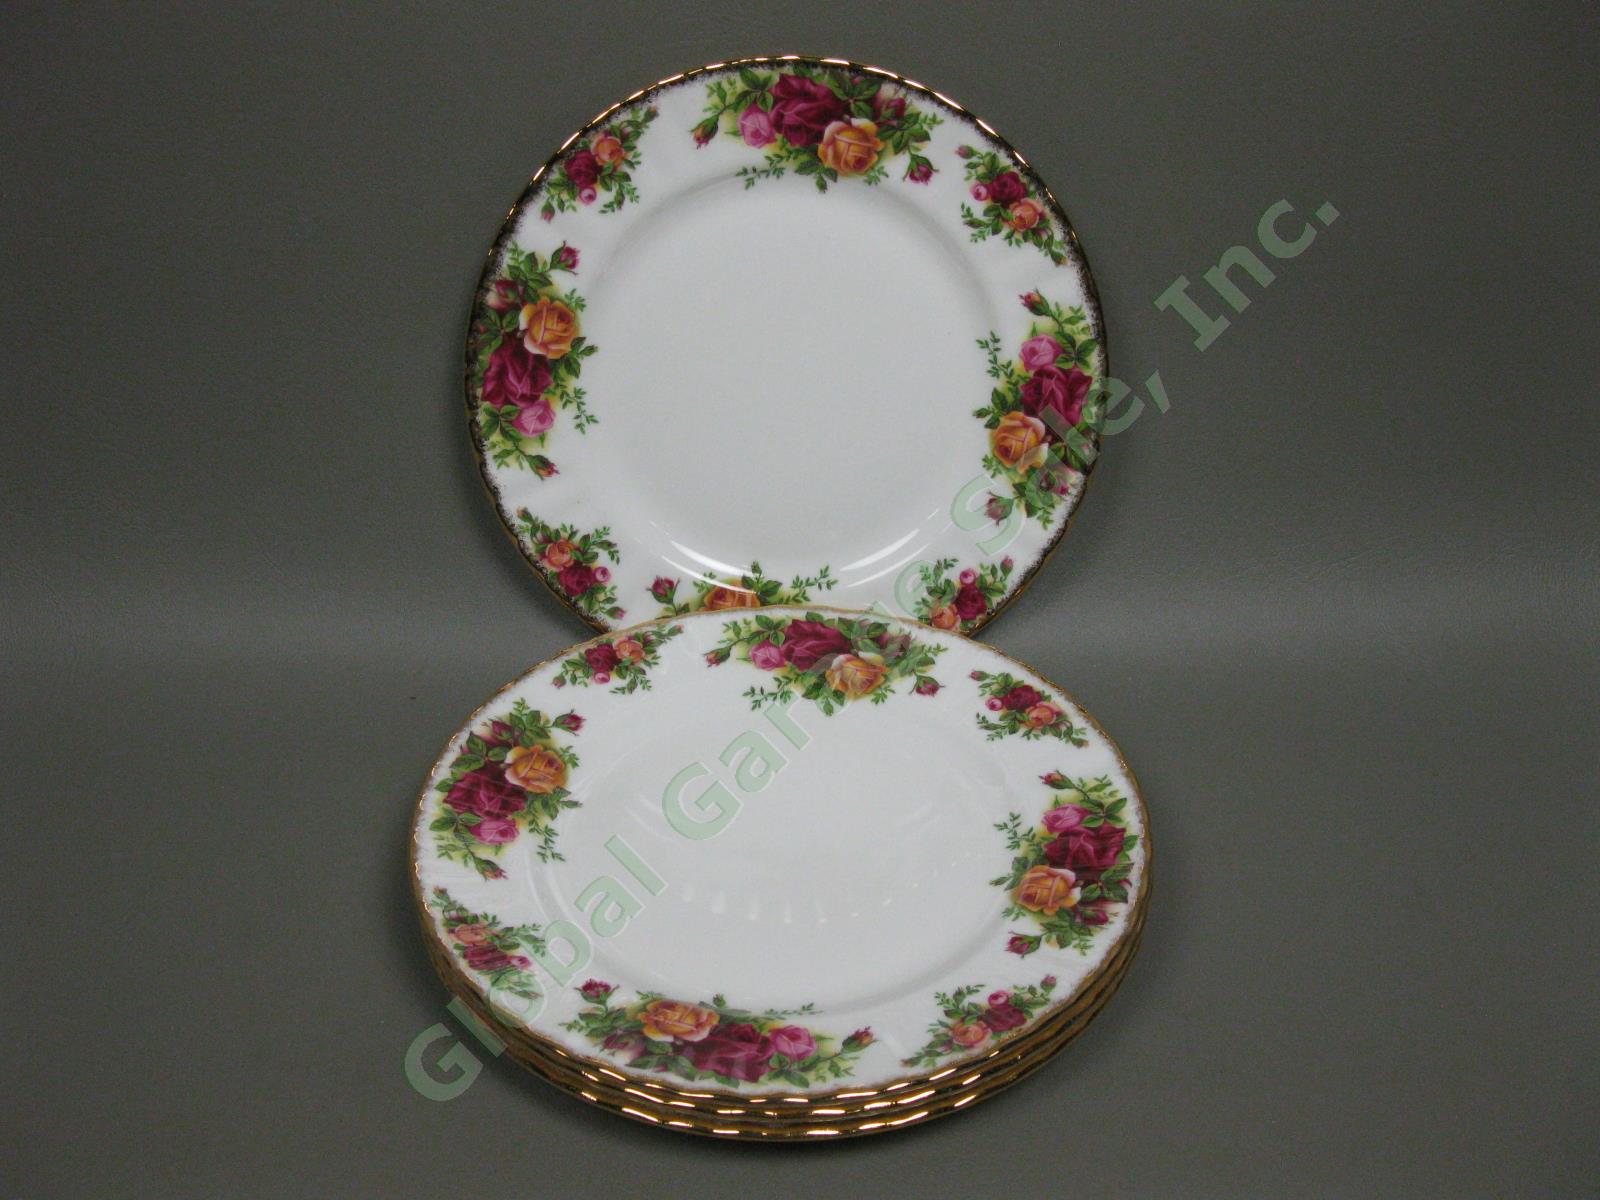 4 Royal Albert Old Country Roses Place Settings Serving Bowl Platter Plate Set 5